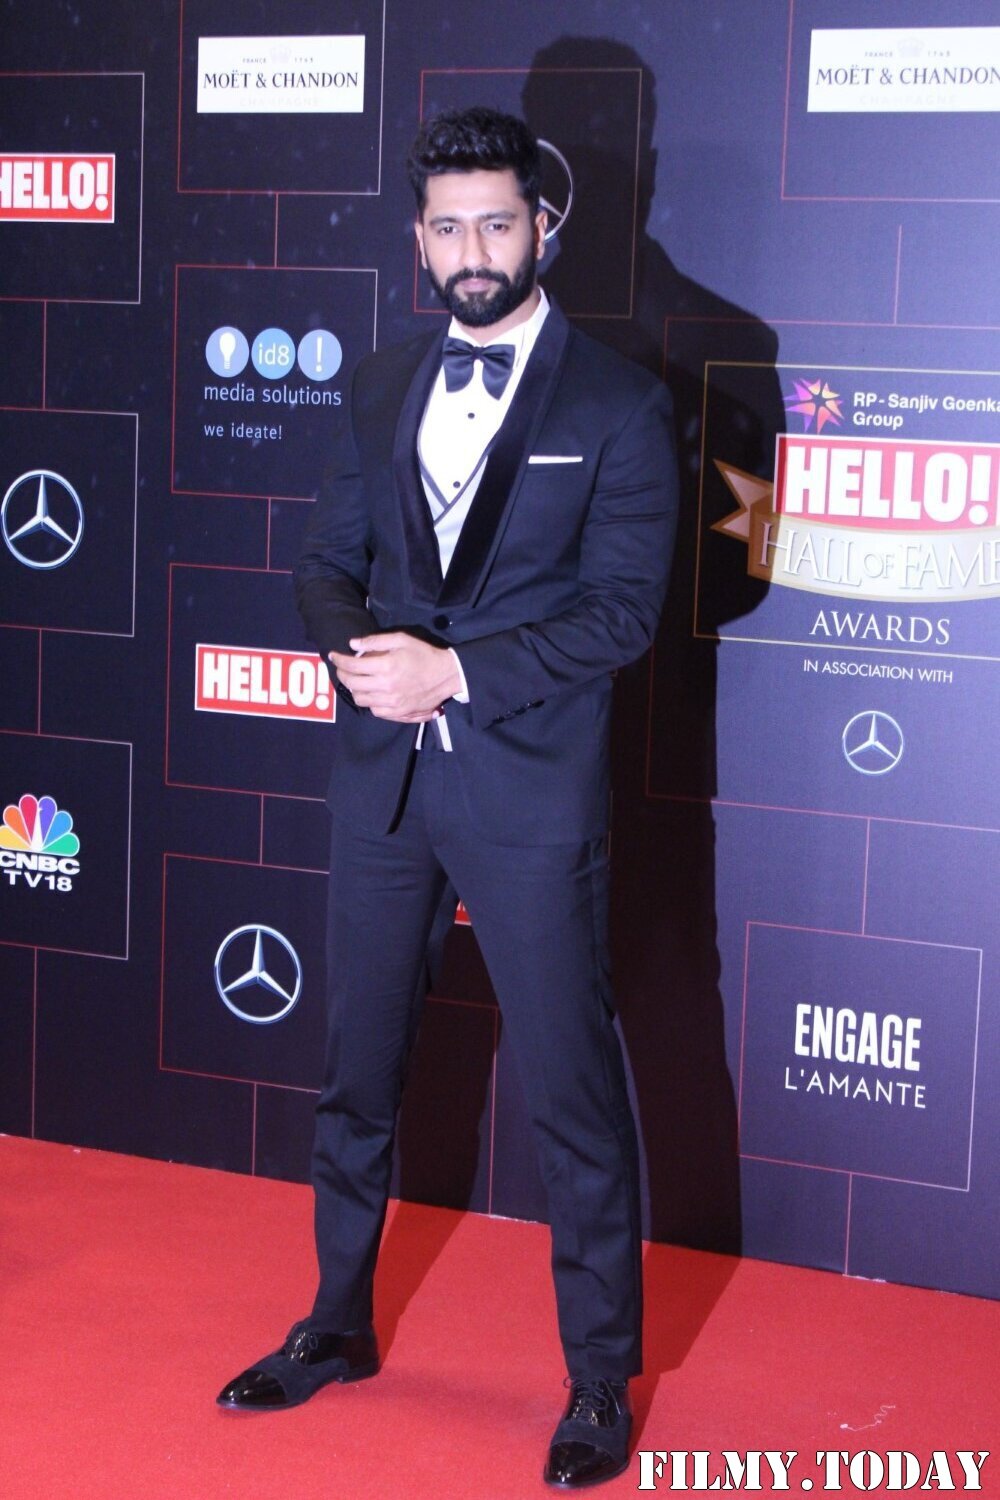 Vicky Kaushal - Photos: Hello! Hall Of Fame Awards 2022 | Picture 1866784